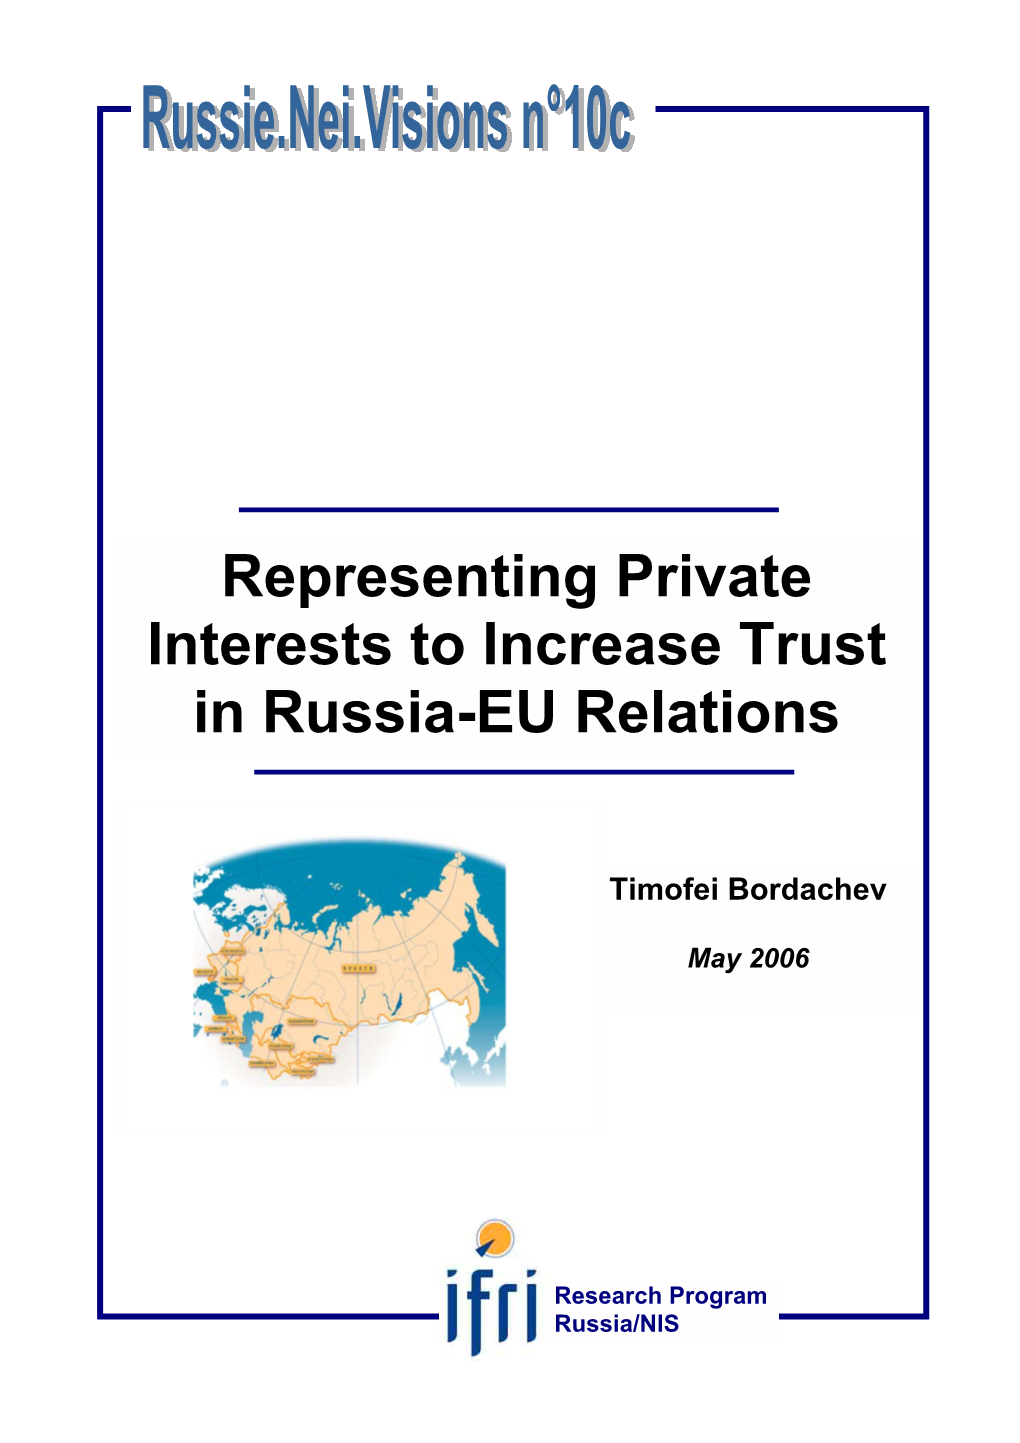 Representing Private Interests to Increase Trust in Russia-EU Relations